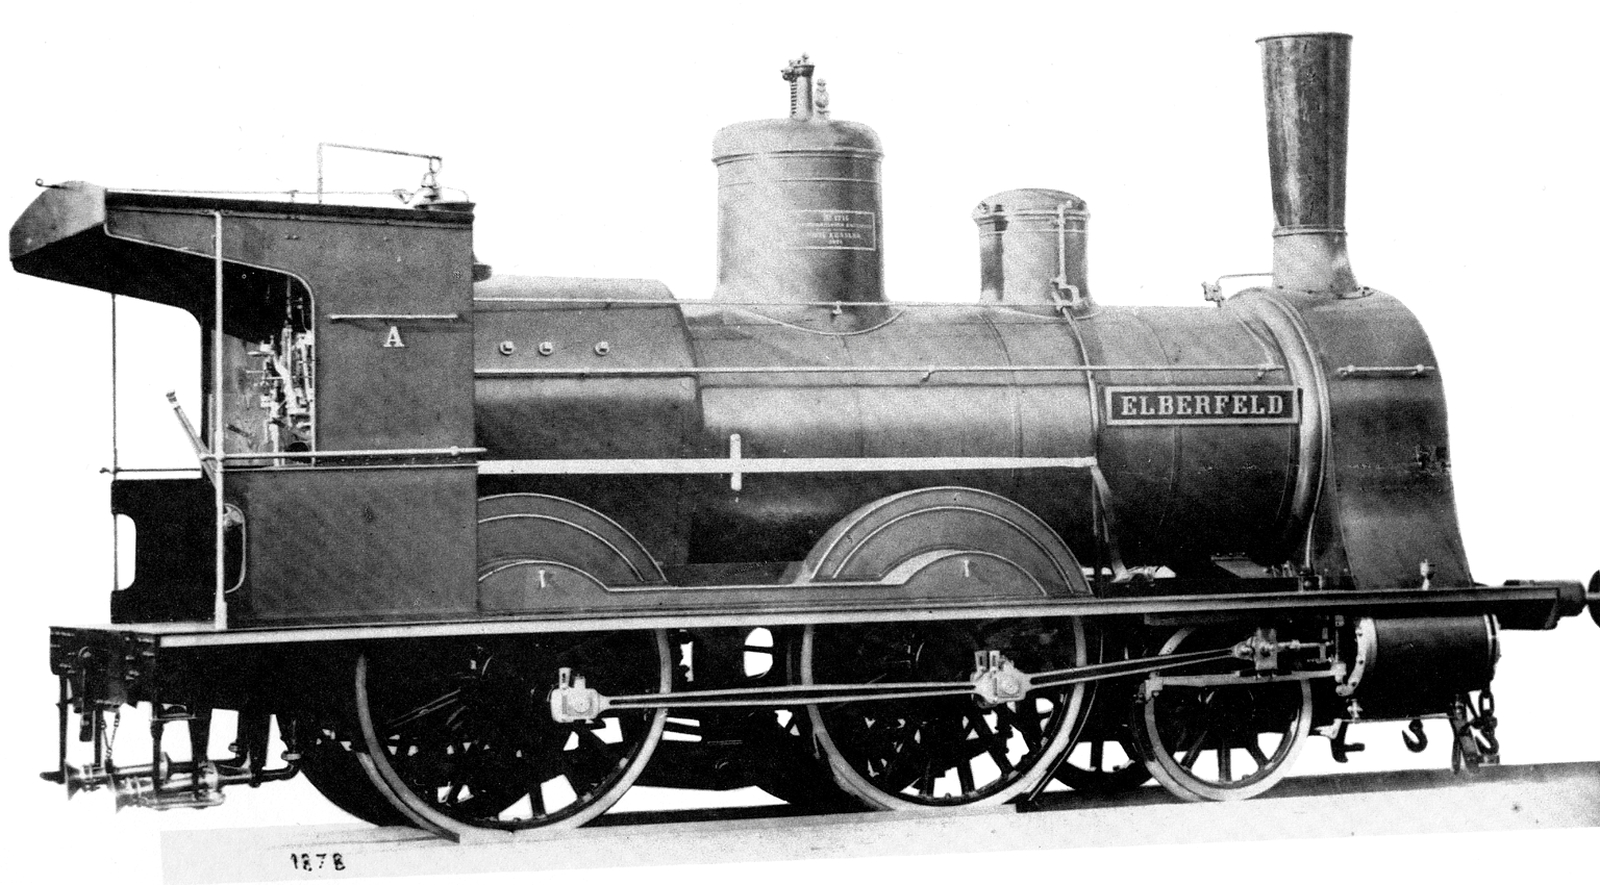 The “Elberfeld” in the version from 1886